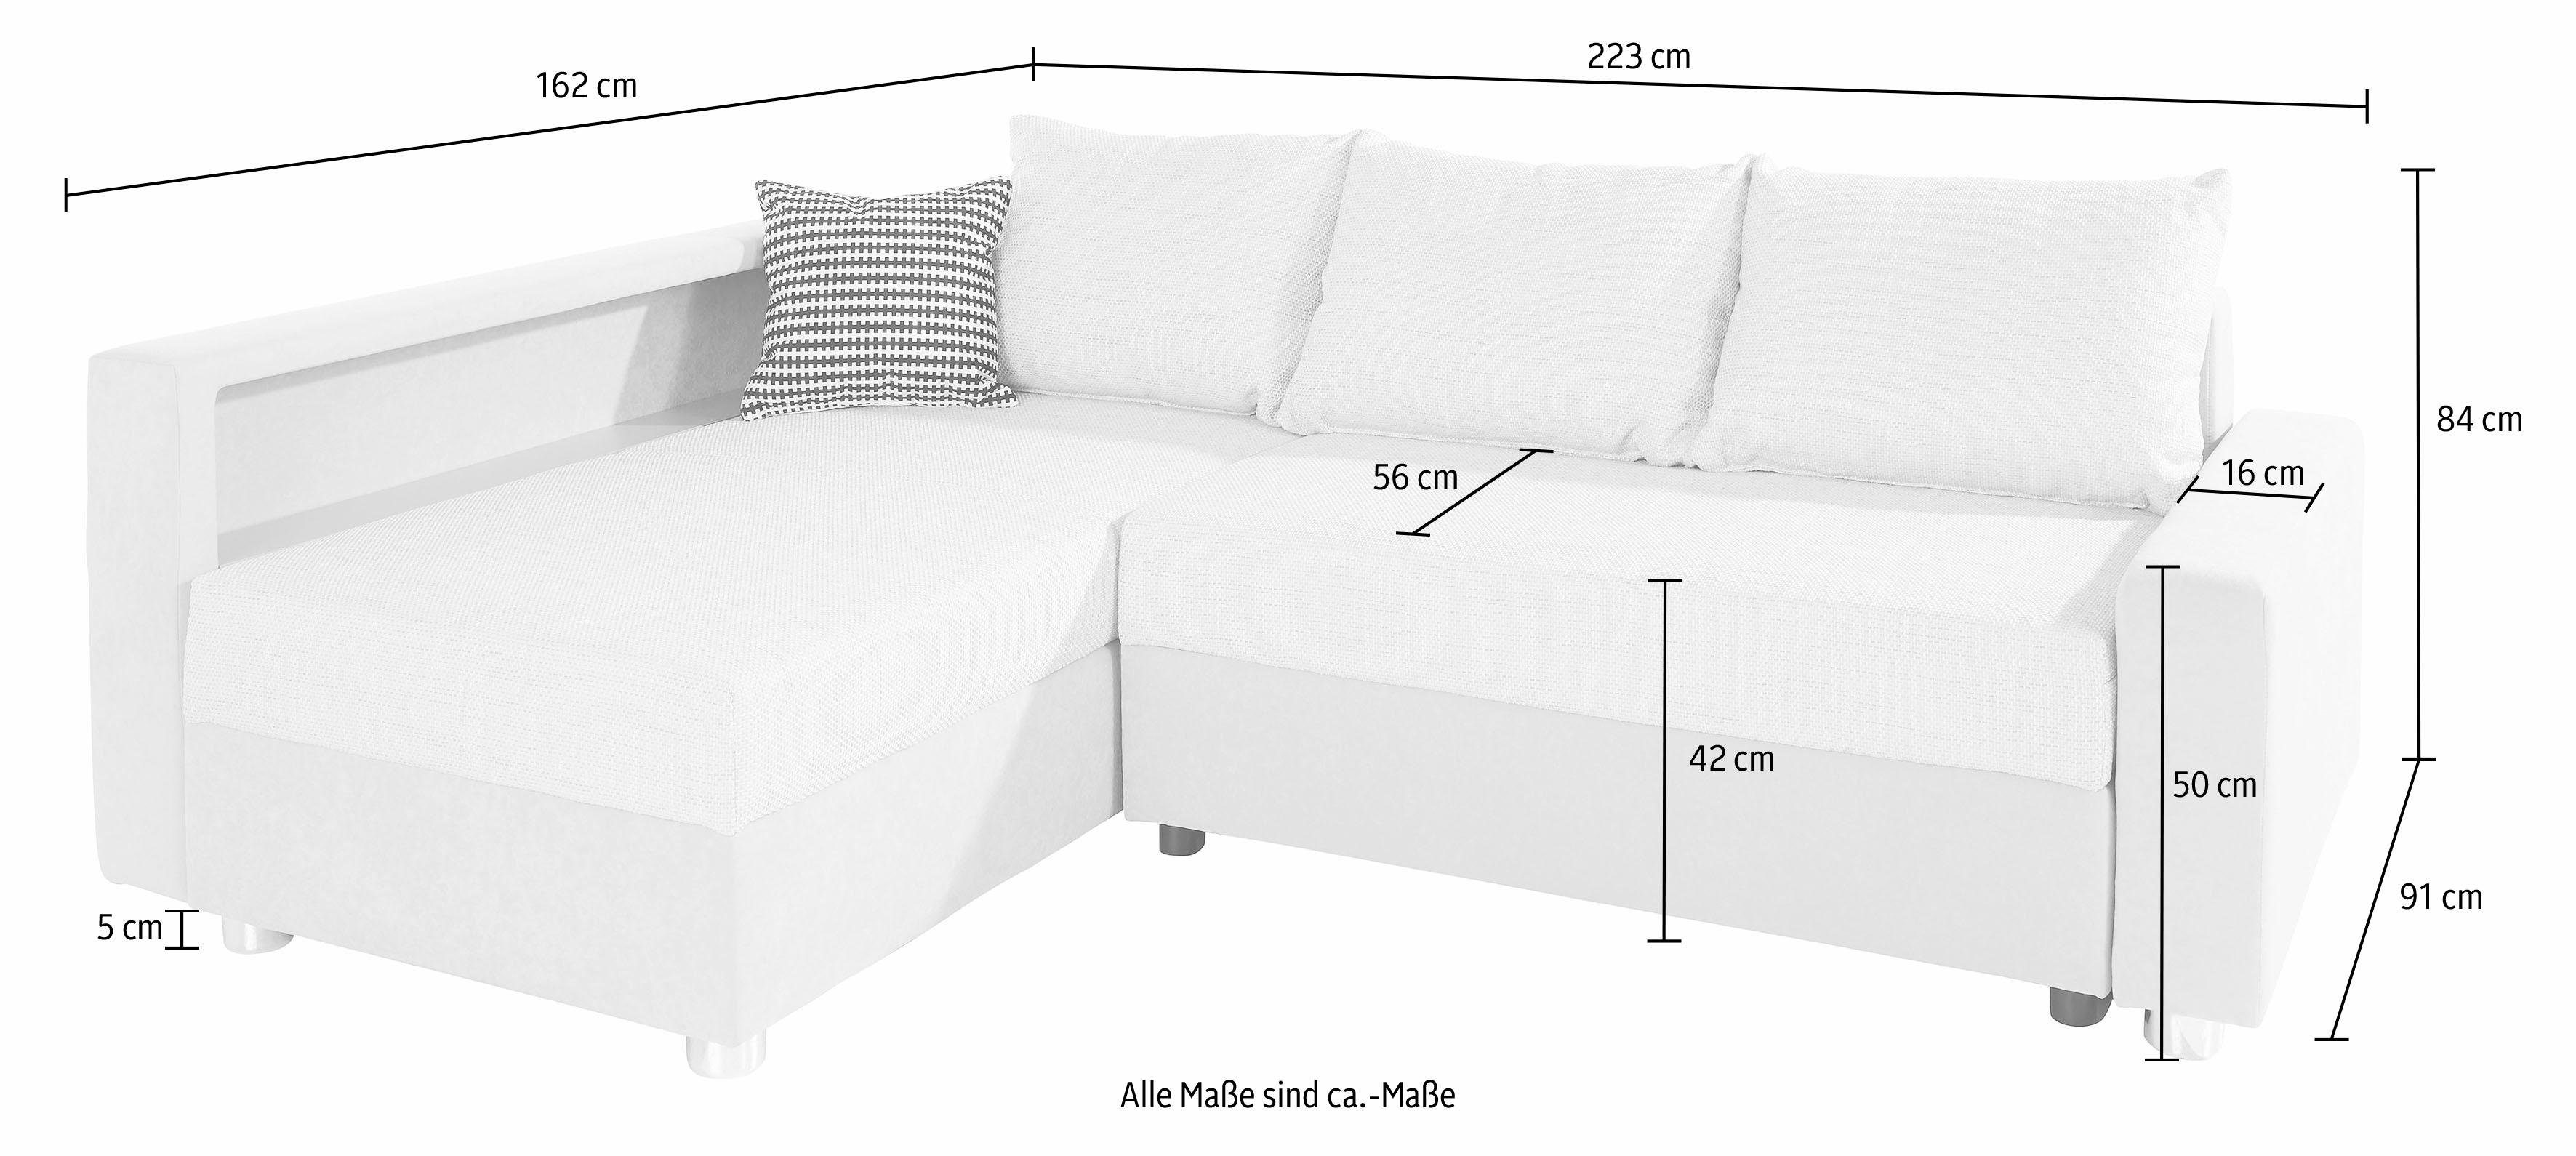 mit inklusive Federkern, wahlweise COLLECTION Ecksofa Relax, AB RGB-LED-Beleuchtung Bettfunktion,